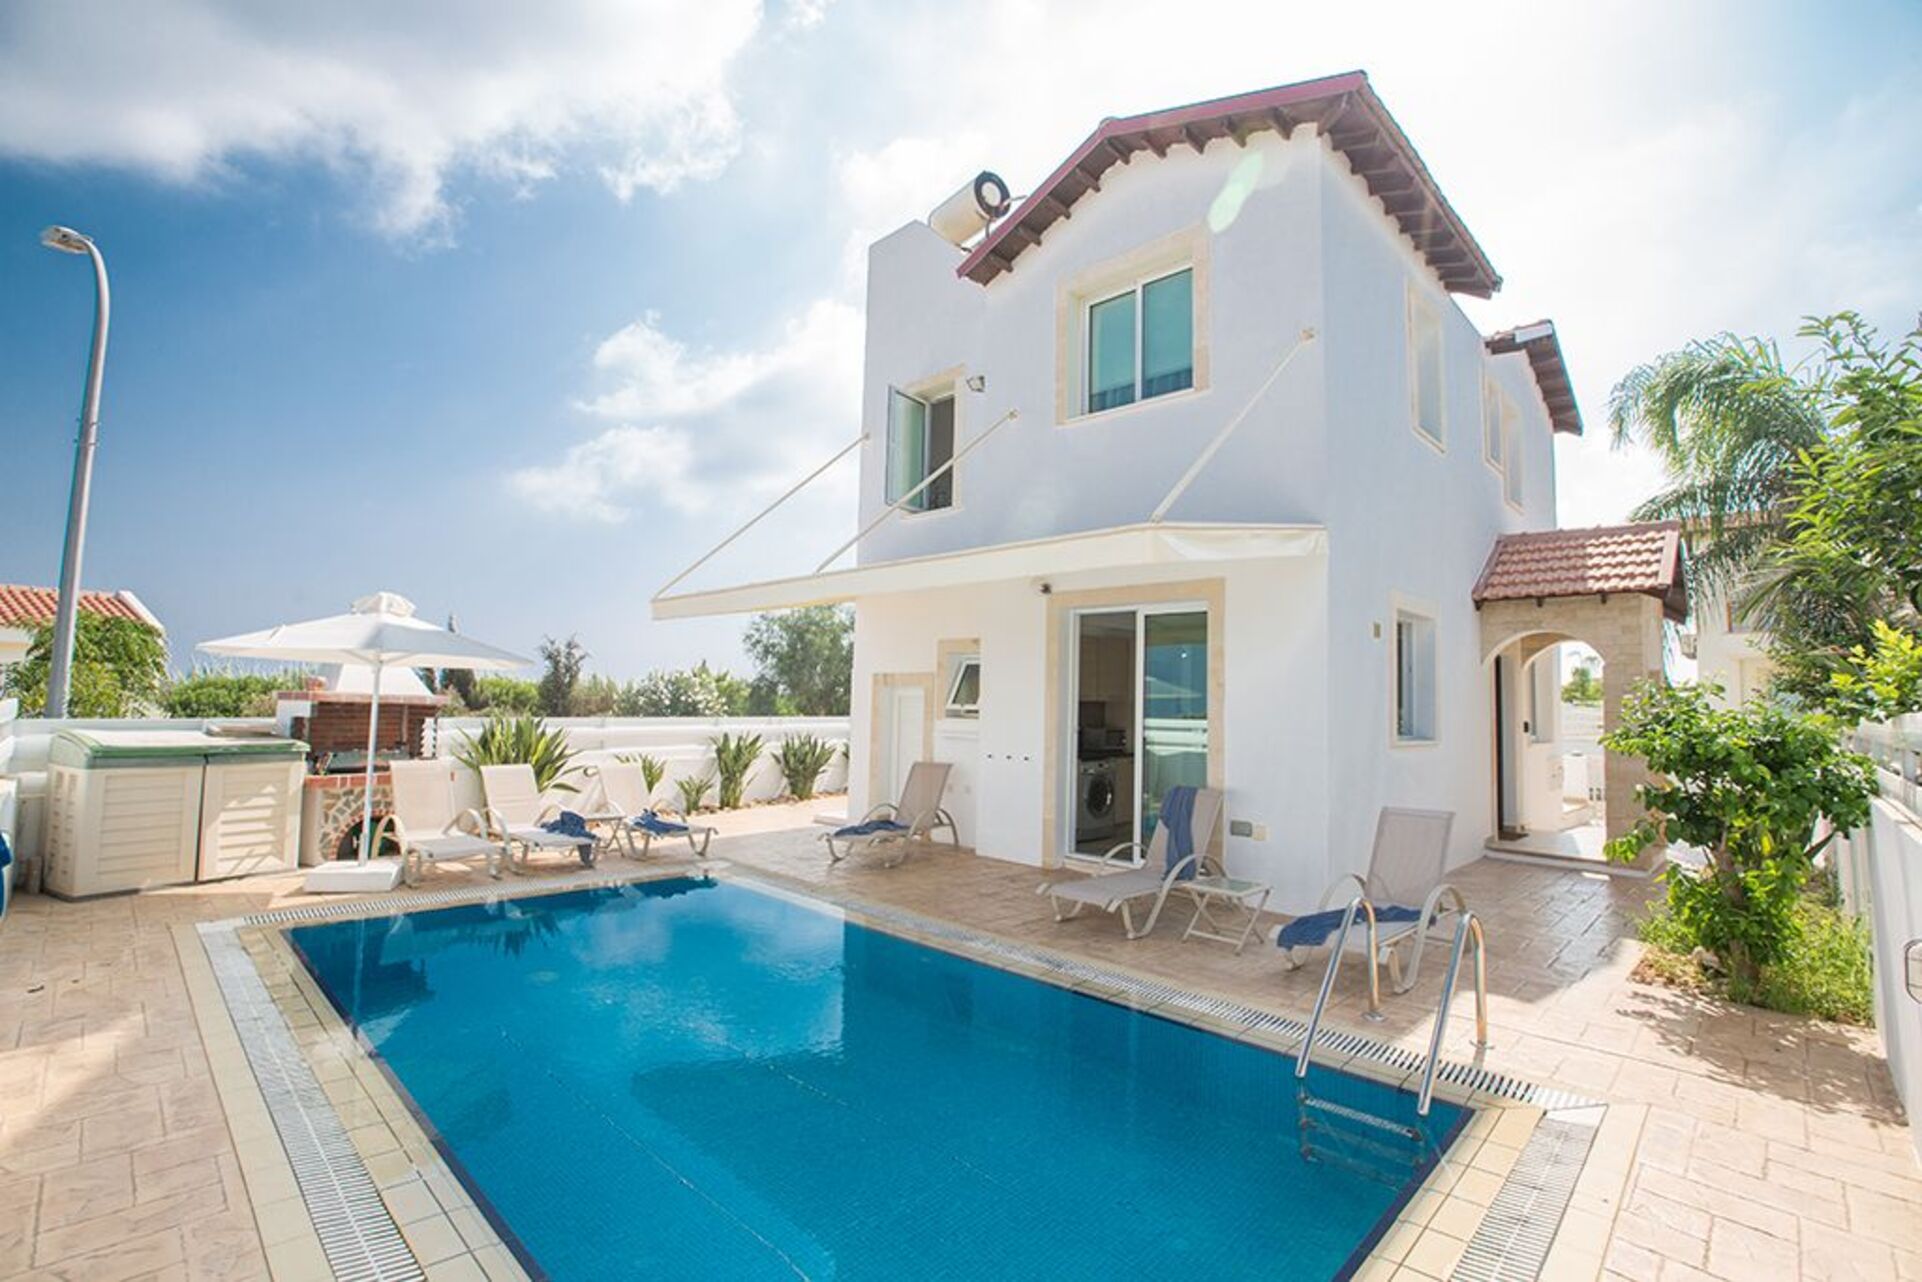 Property Image 1 - Rent Your Dream Protaras Holiday Villa and Look Forward to Relaxing Beside Your Private Pool, Paralimni Vi